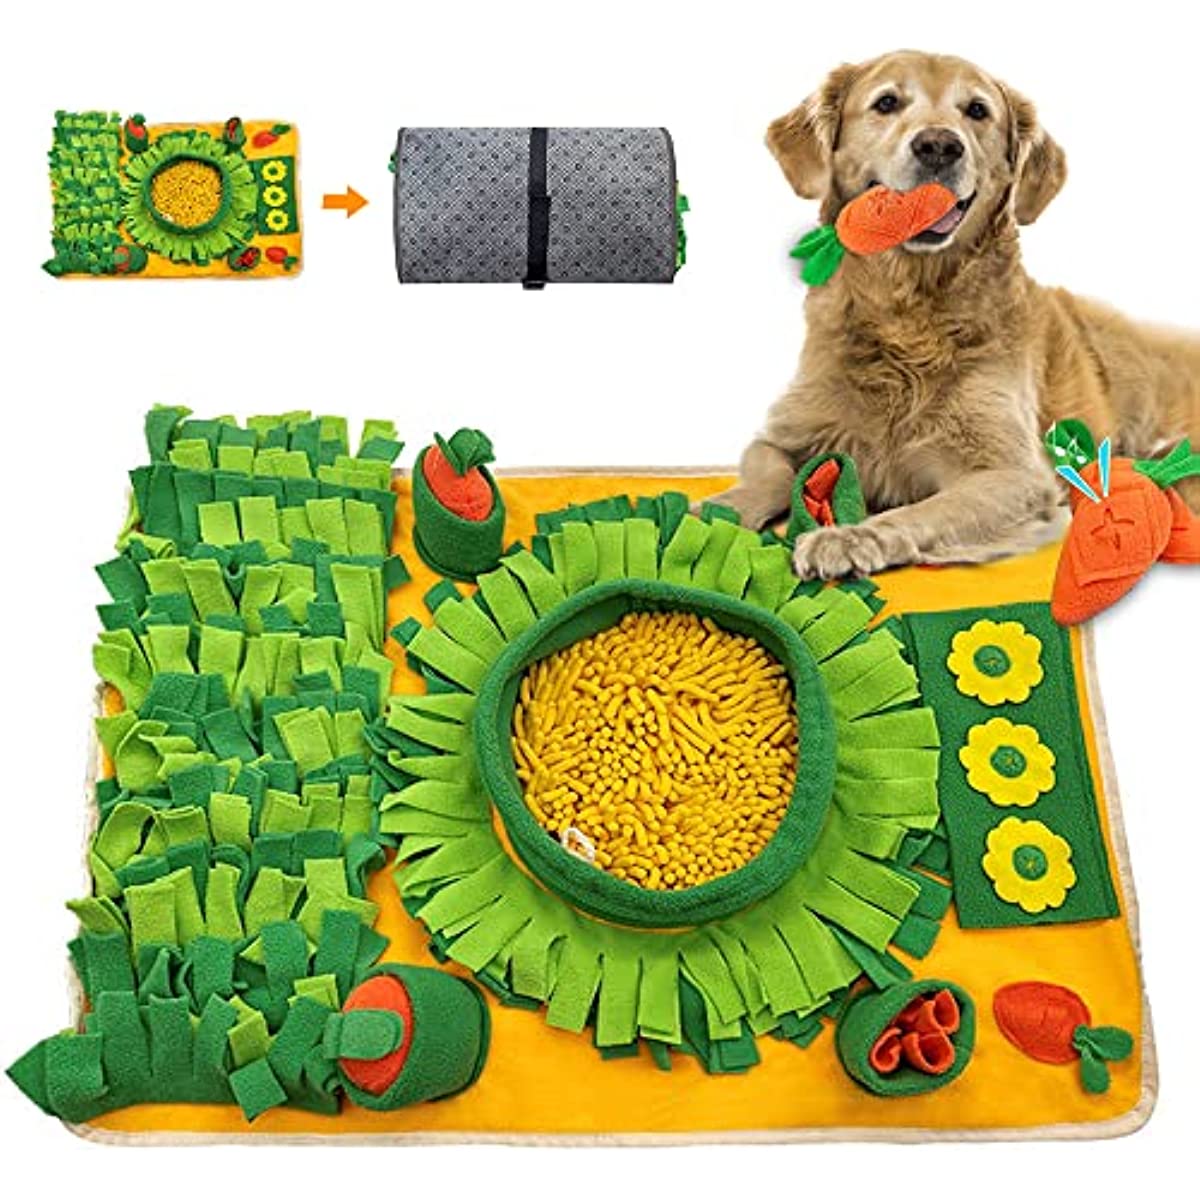 Interactive Dog Toys for Mental Stimulation – P.L.A.Y.